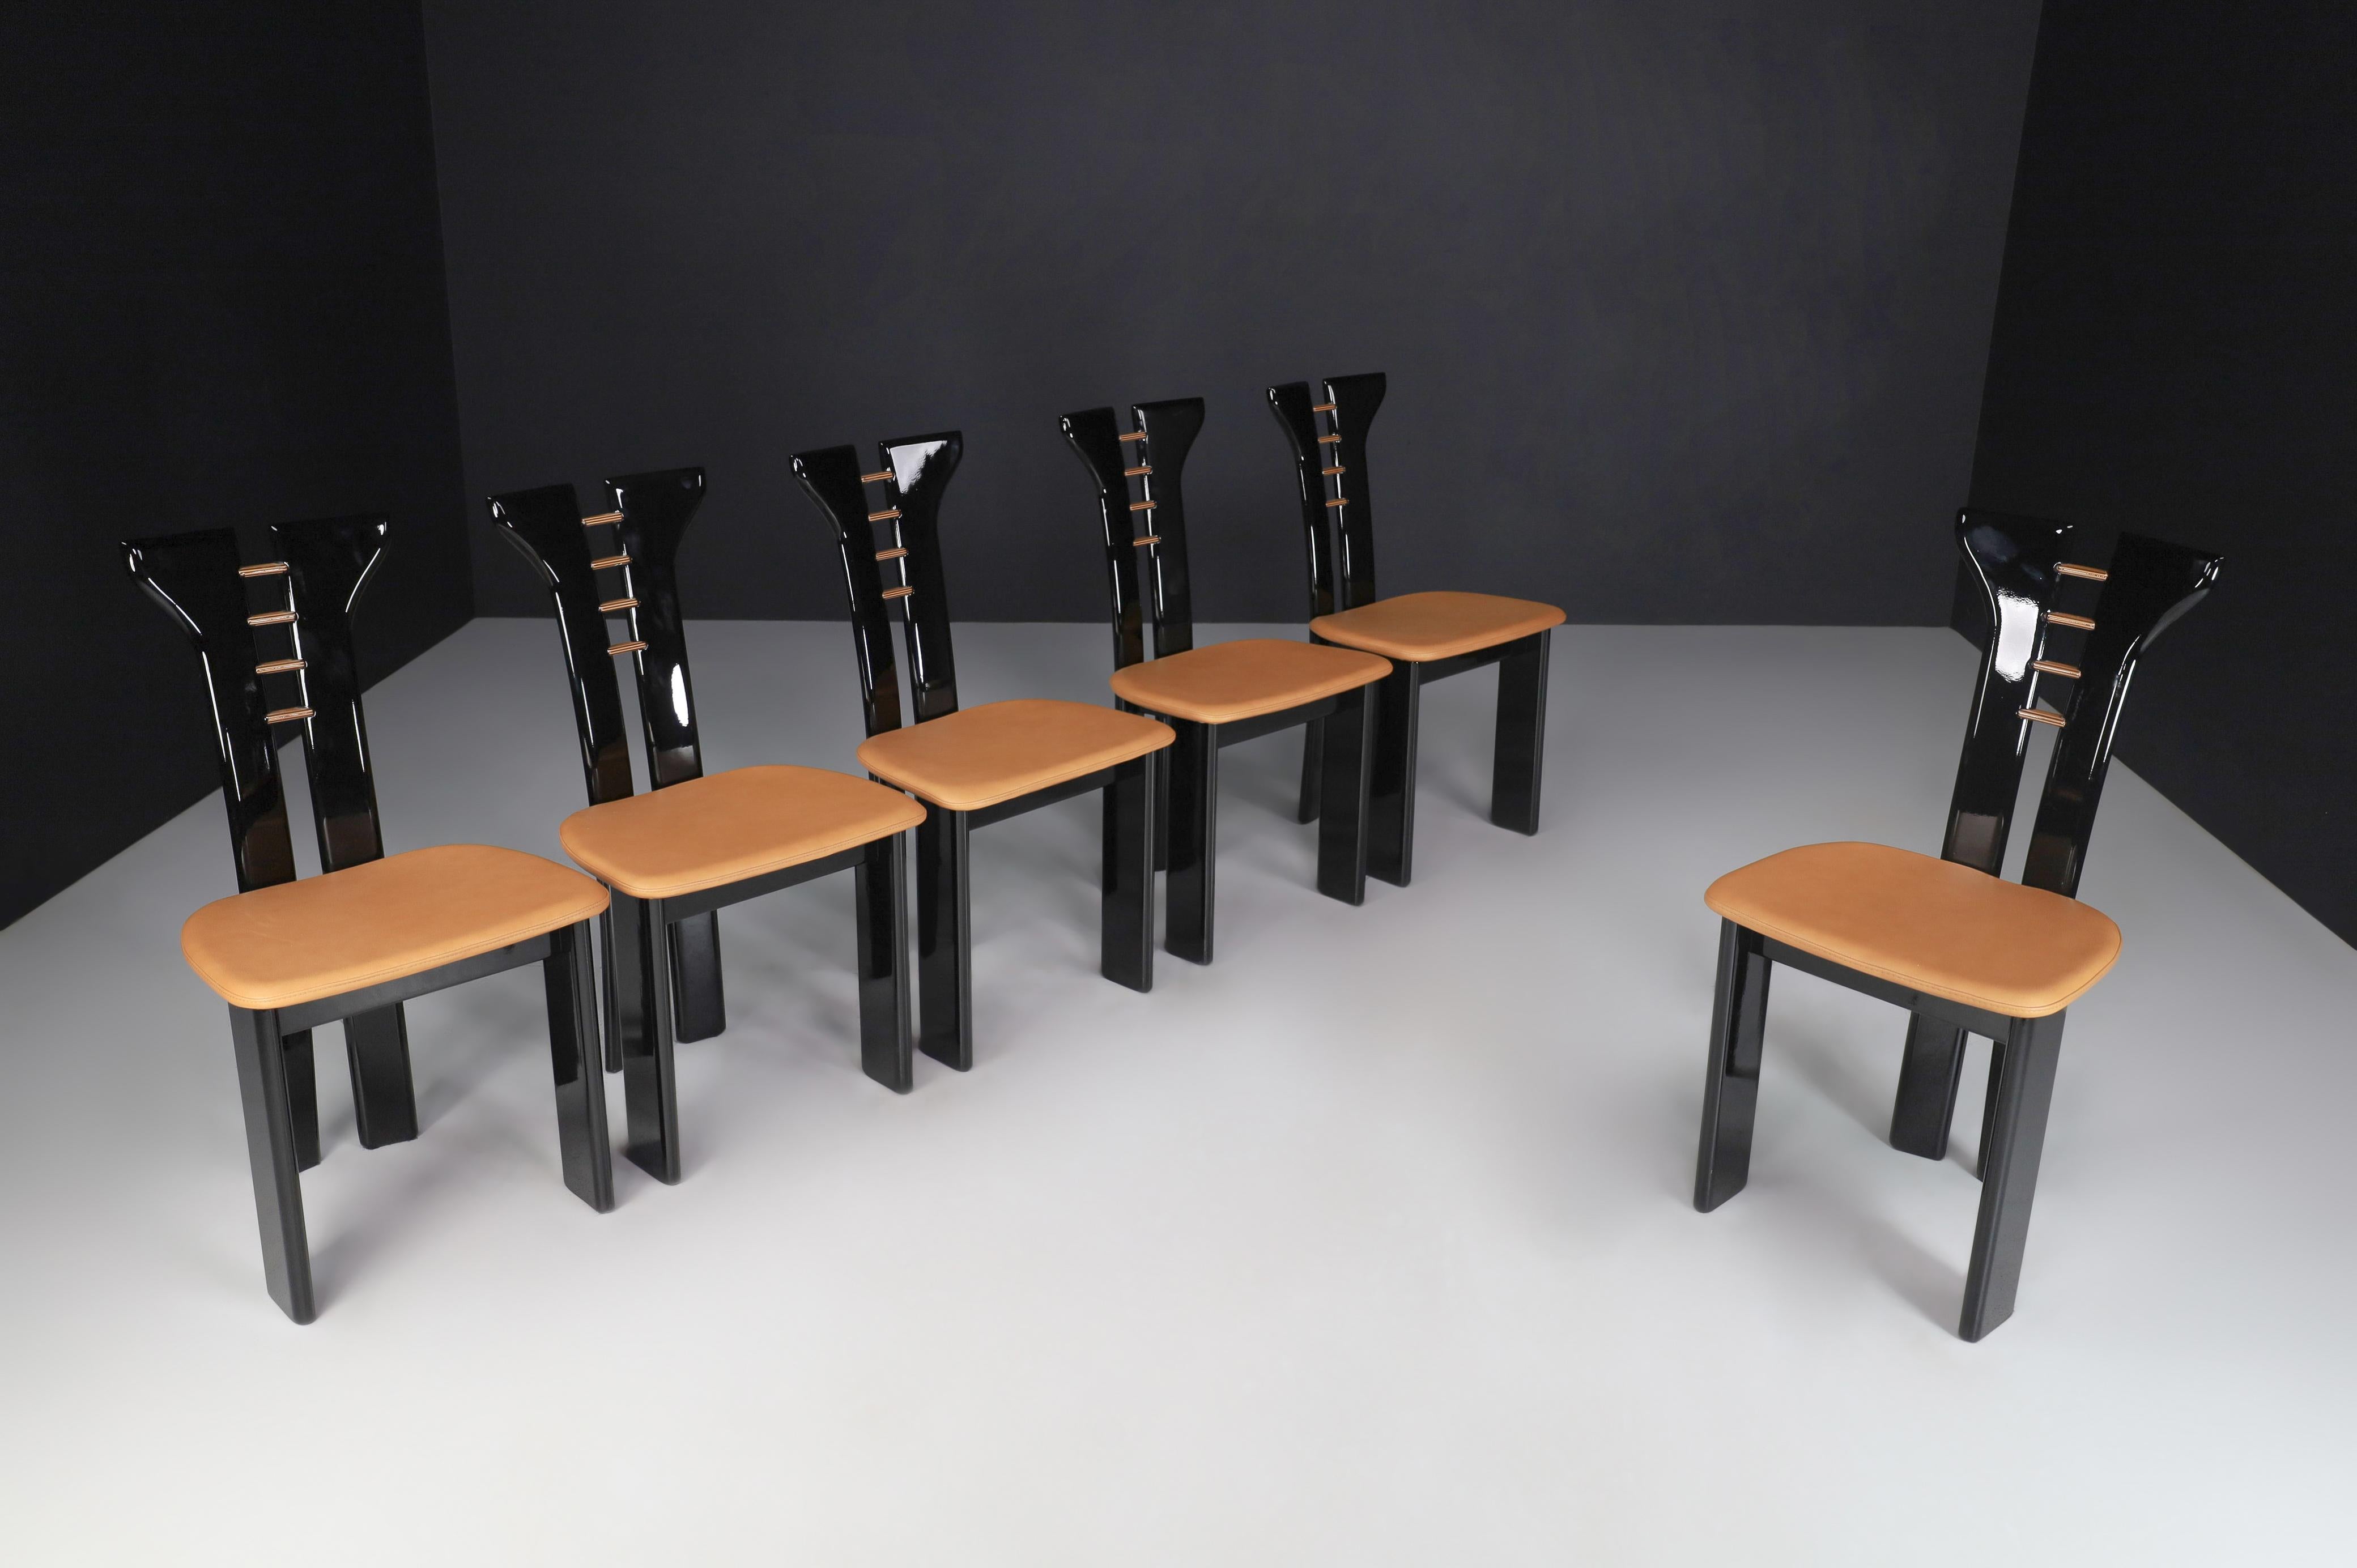 Pierre Cardin for Roche Bobois dning chairs, Italy 1970s

Beautiful, elegant set of six 1970s Pierre Cardin-designed dining chairs by Roche Bobois. Original leather seats. Black lacquer finish with wood accents. The vintage condition is excellent,